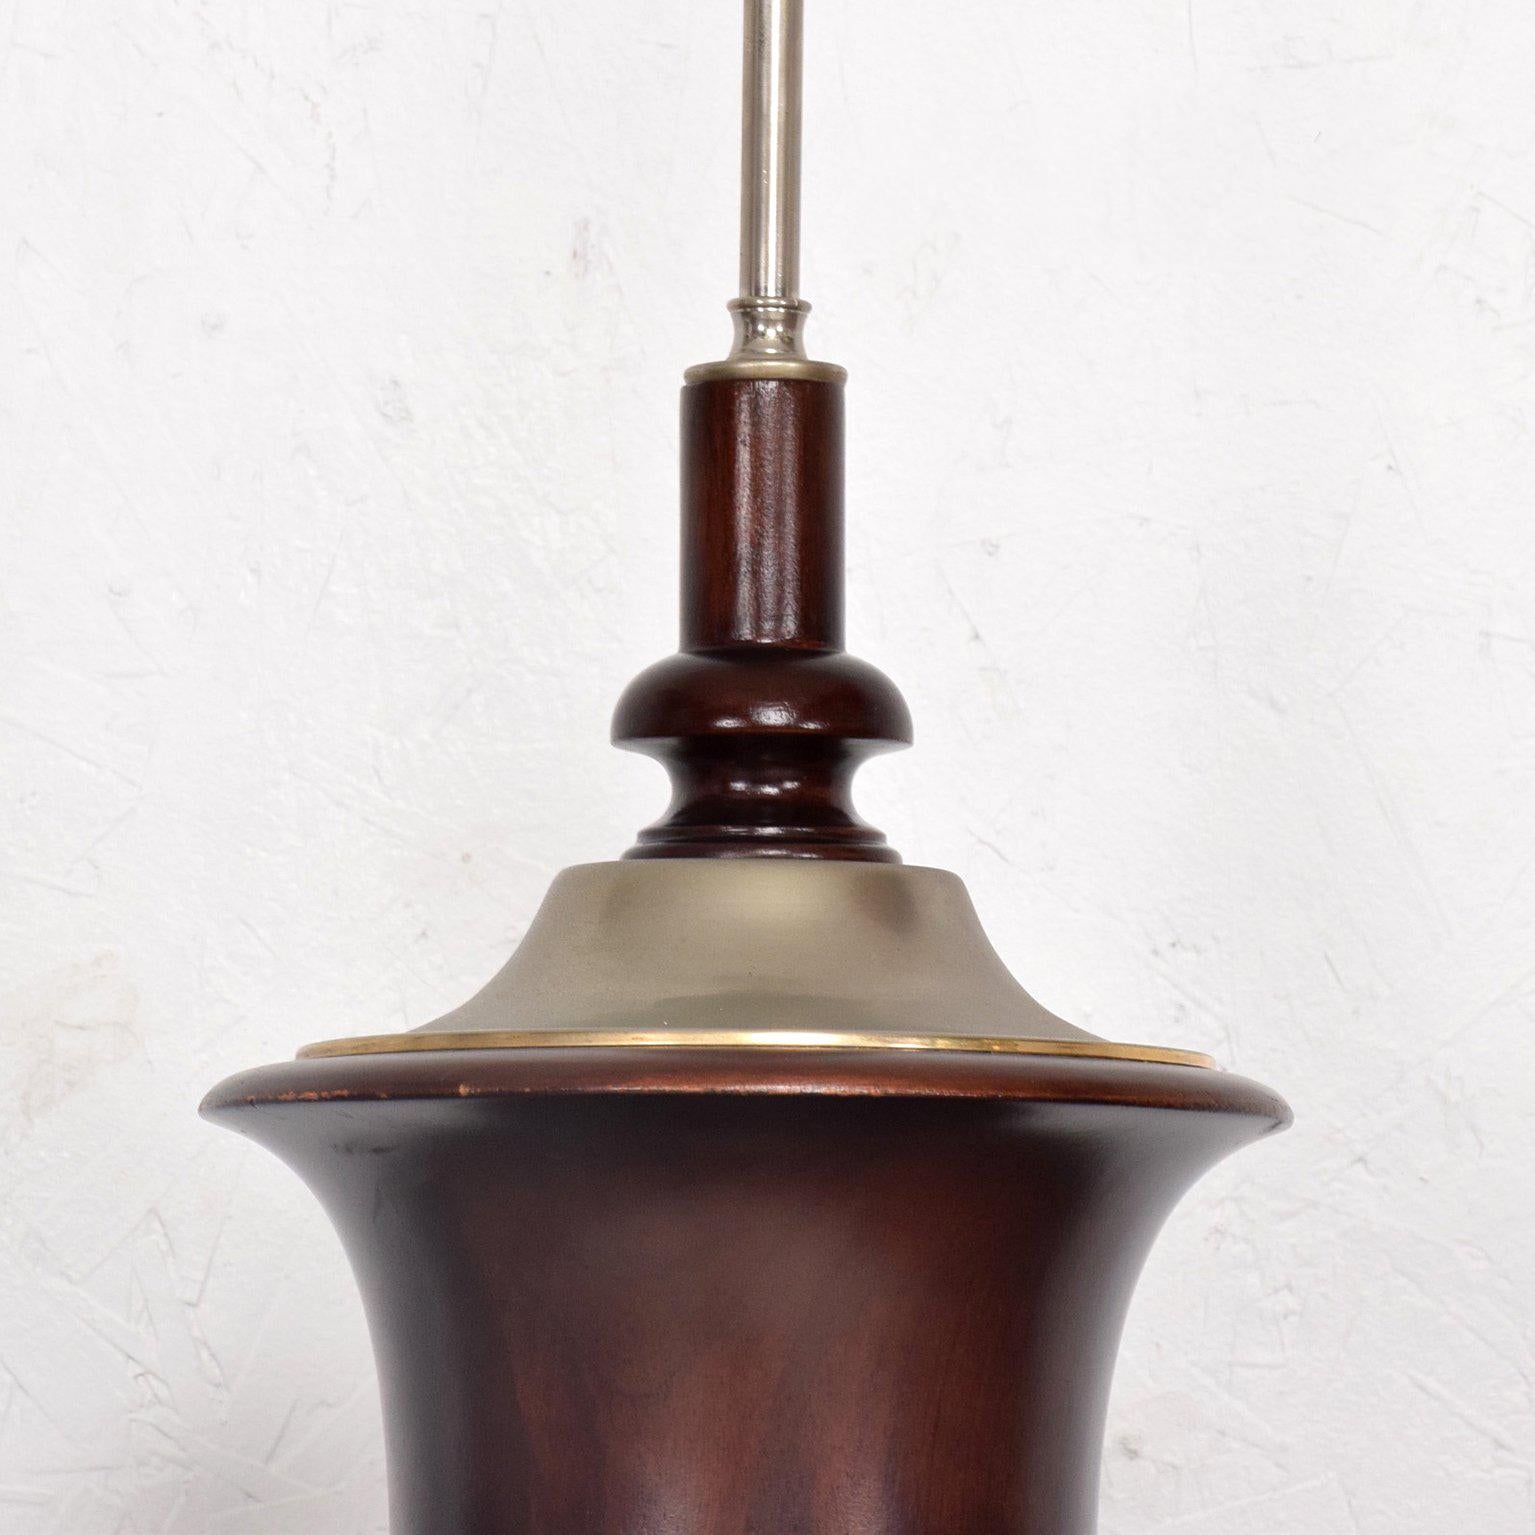 Pair of Neoclassical Table Lamps in Mahogany & Nickel-Plated, Mexican Modernist 3